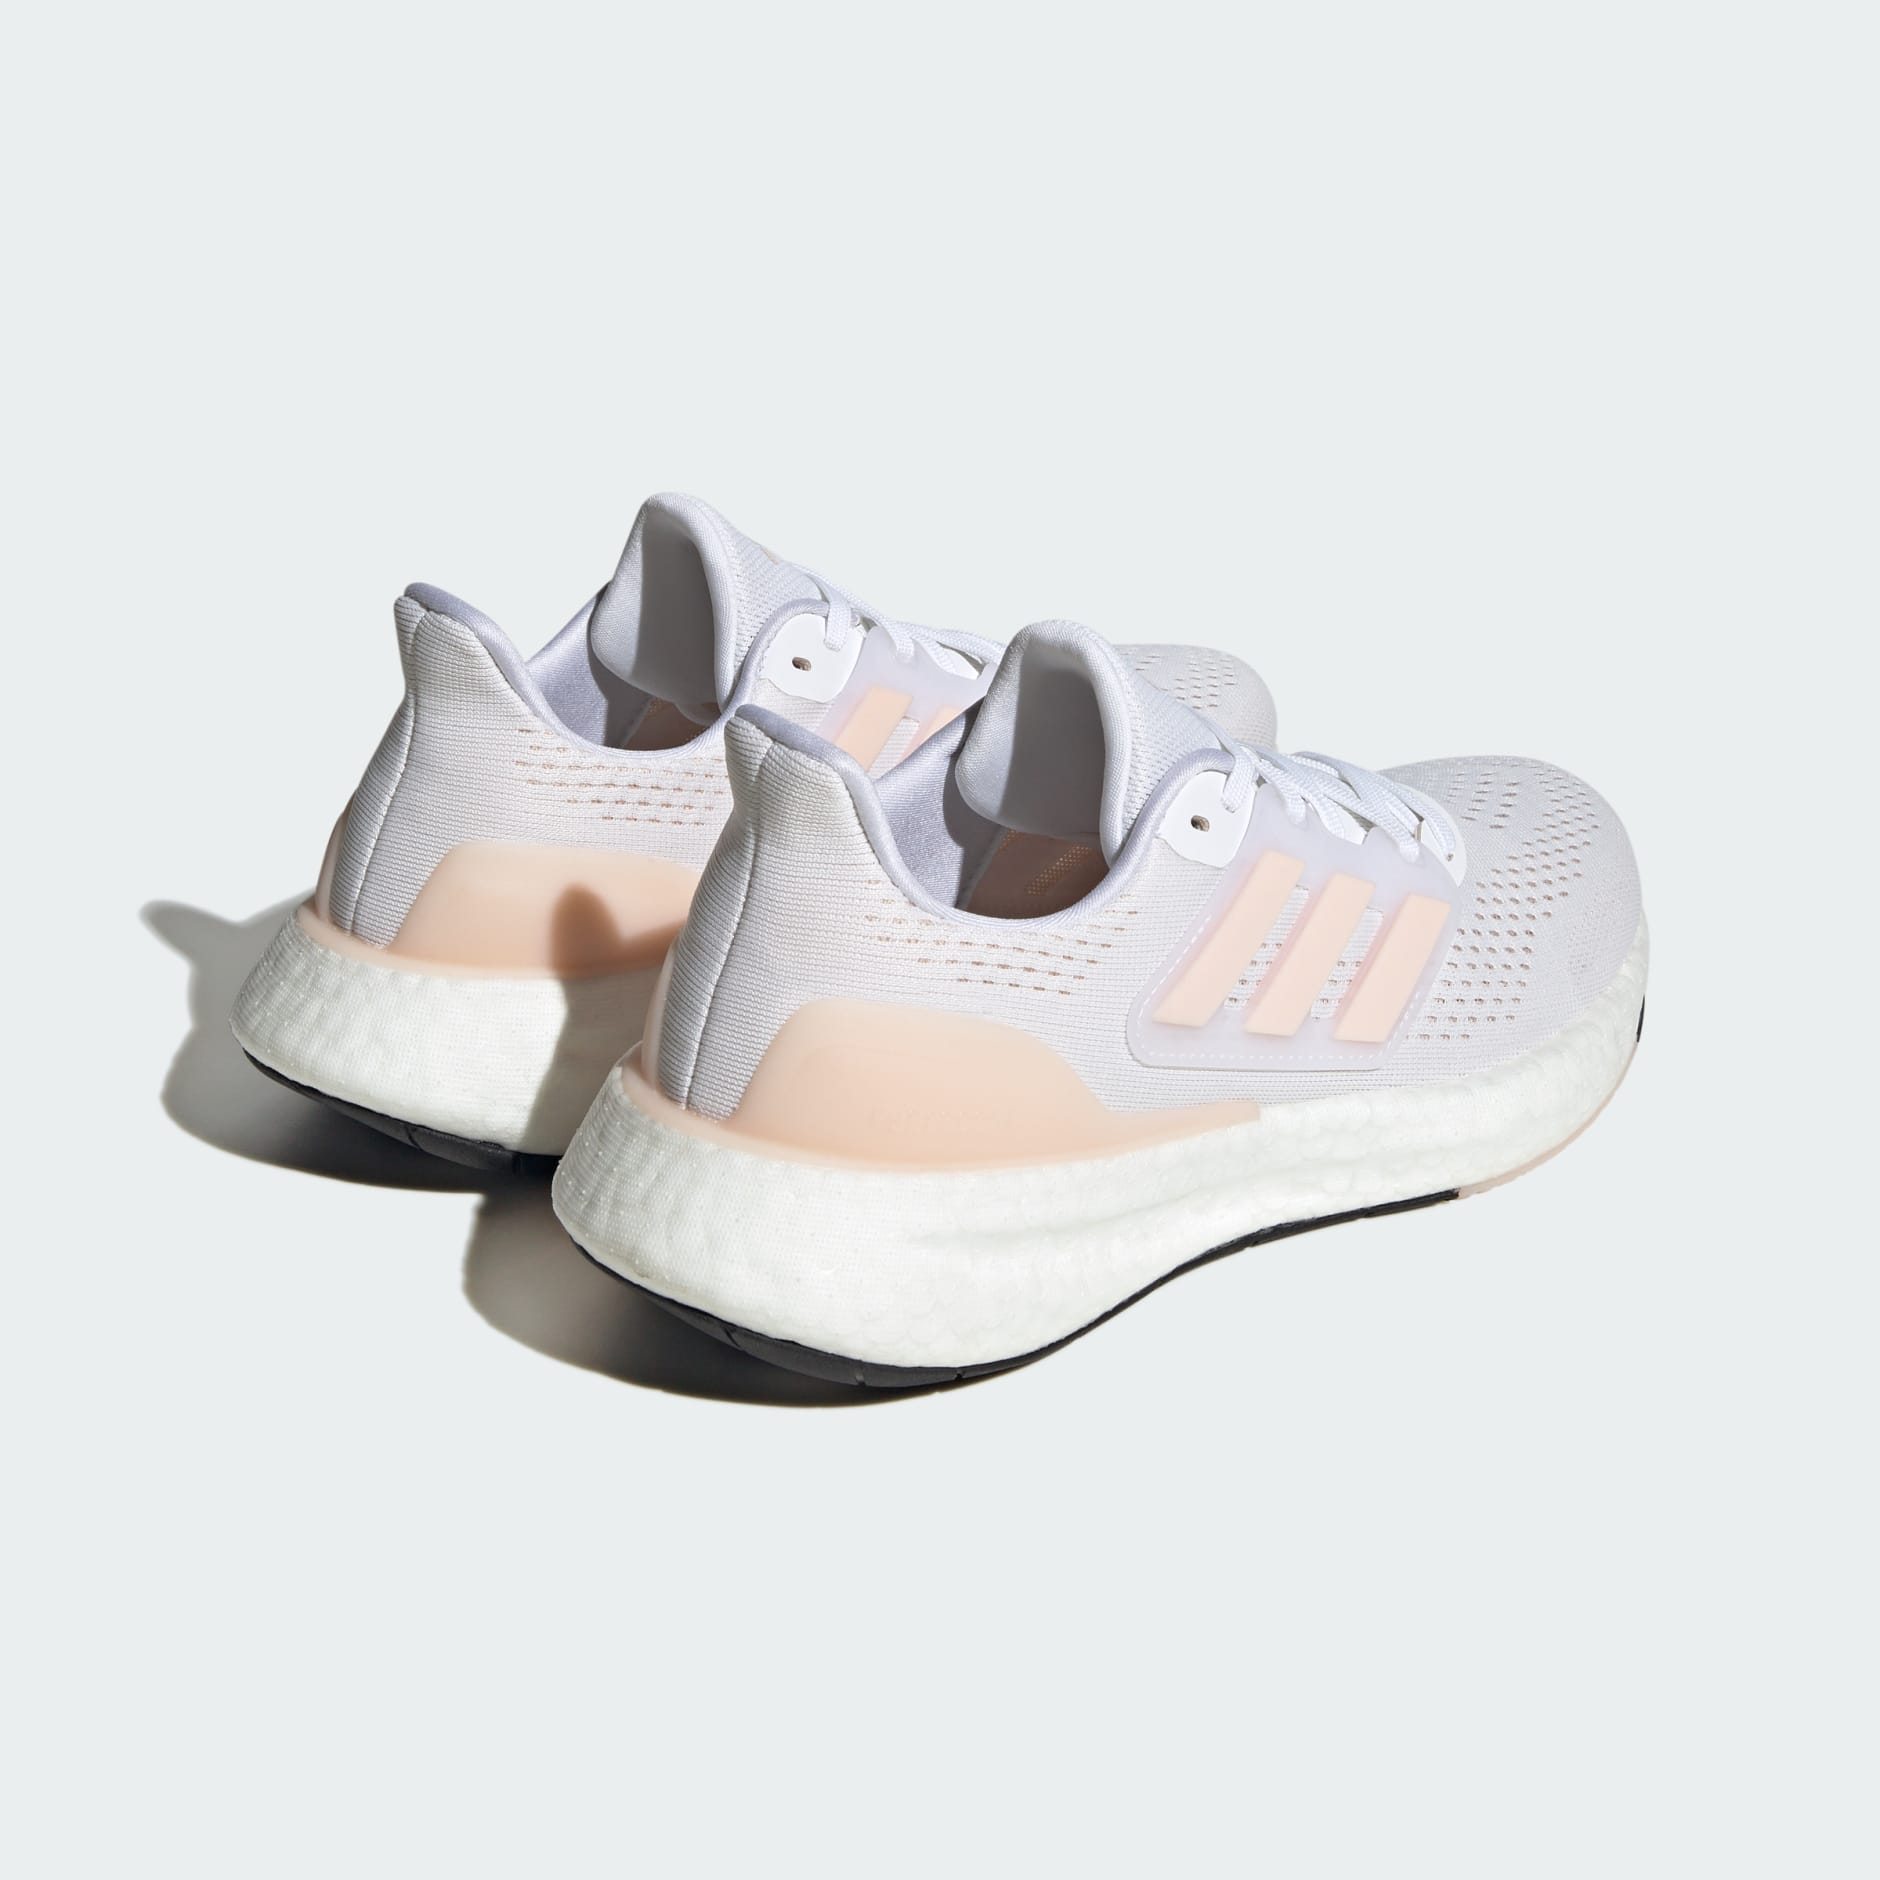 Shoes - Pureboost 23 Shoes - White | adidas South Africa